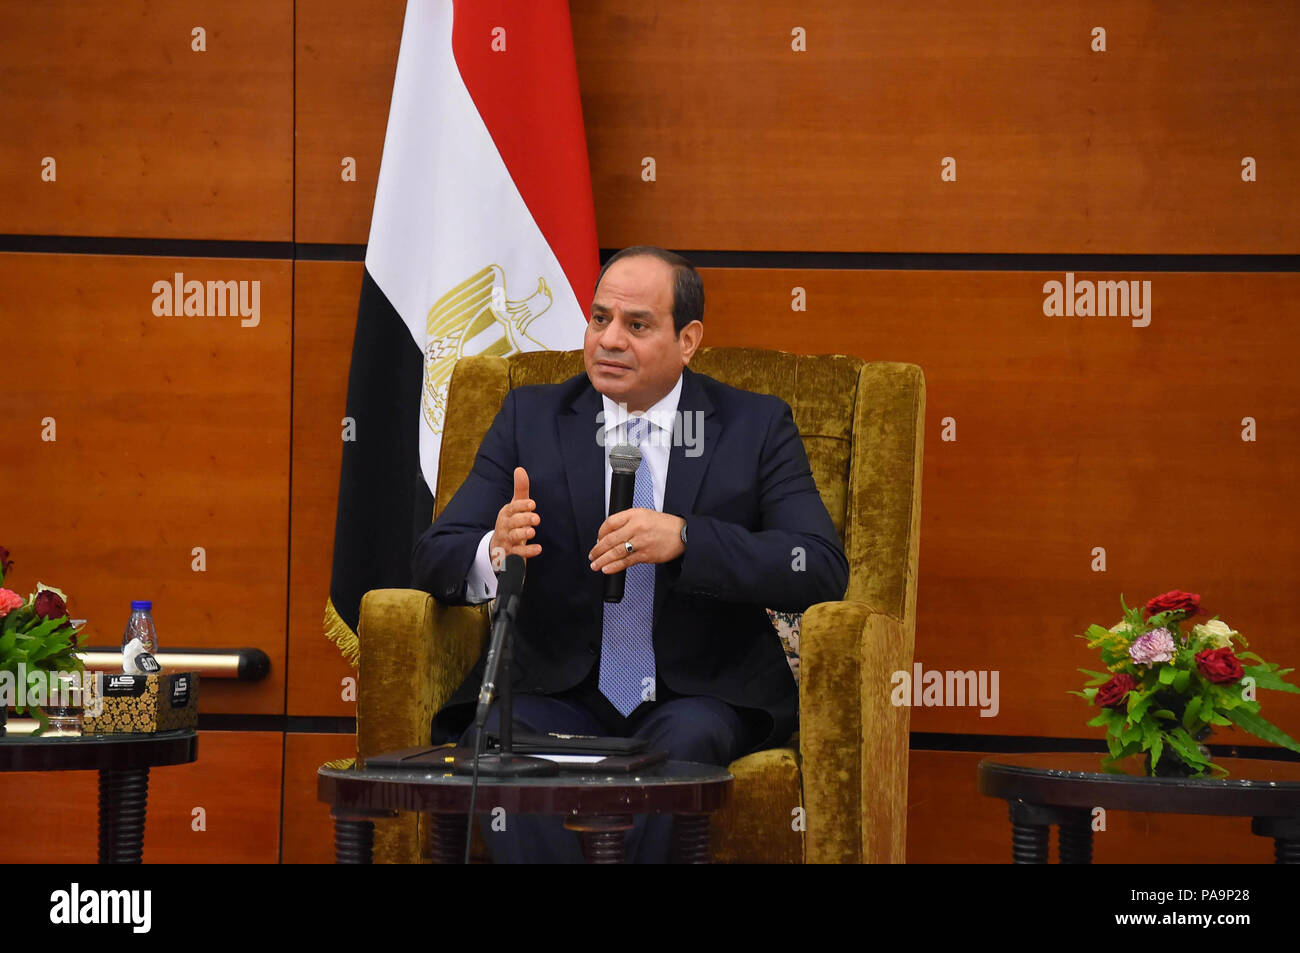 Khartoum, Sudan - 19-20 July 2018 - Egyptian President Abdel Fattah El Sisi makes a 2-day state visit to Sudan for talks with Sudanese President Omar Al Bashir for discussion on bilateral relations and other topics.  (presidential pool photo) Stock Photo